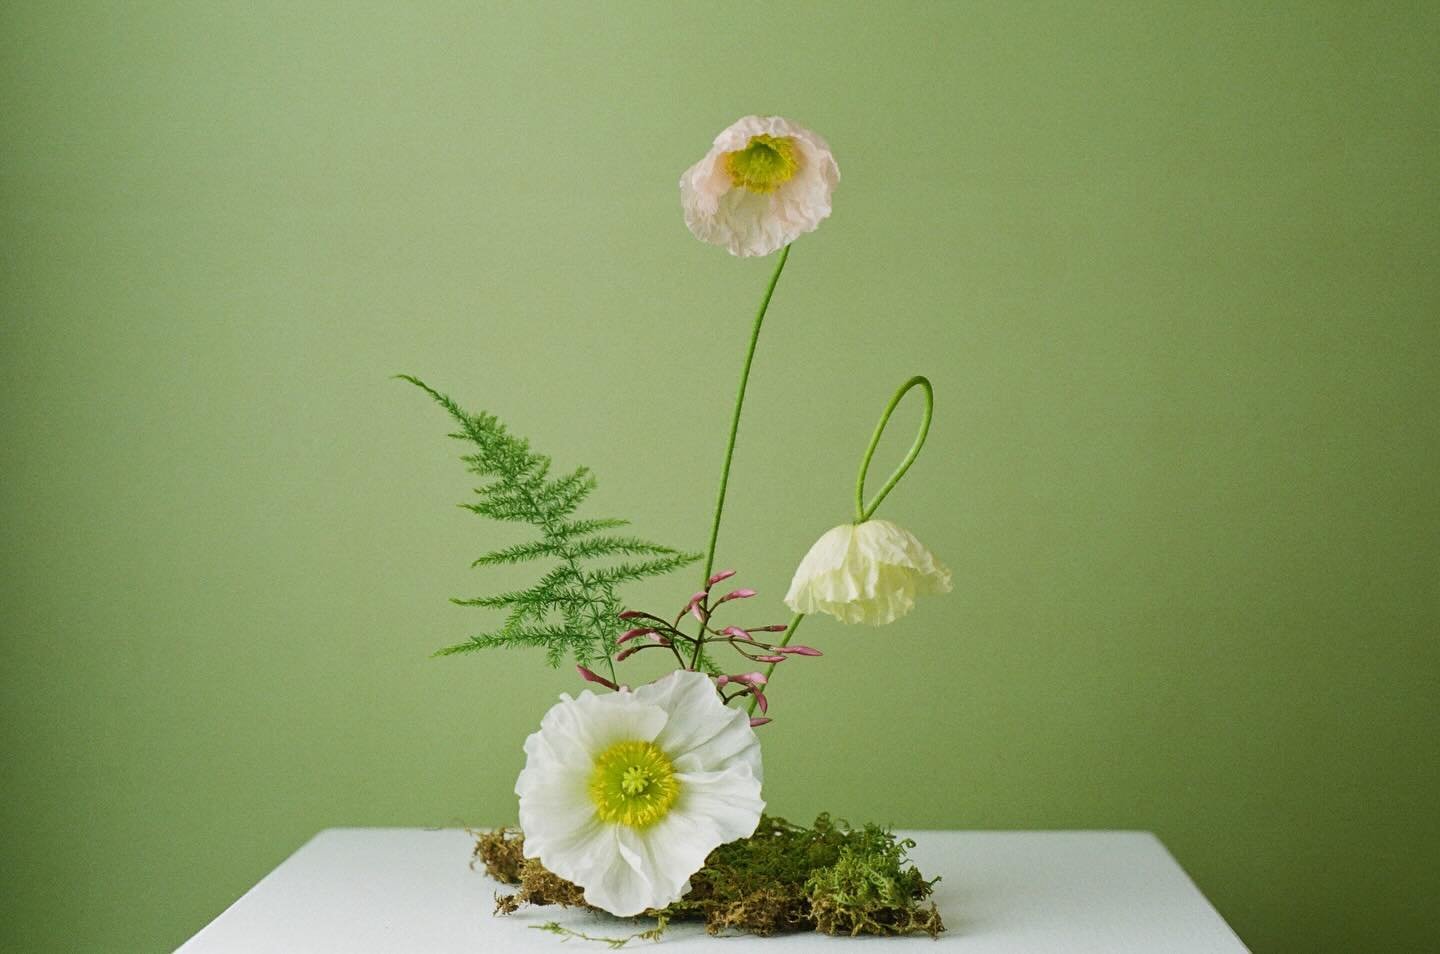 A delightful little mix // shot on film. 

Poppies, jasmine, asparagus fern, moss. For some fine art prints that will be available this weekend ⚡️ stay tuned on how to snag one for yourself!!

#floralart #floralstilllife #floralstyling #floralstudio 